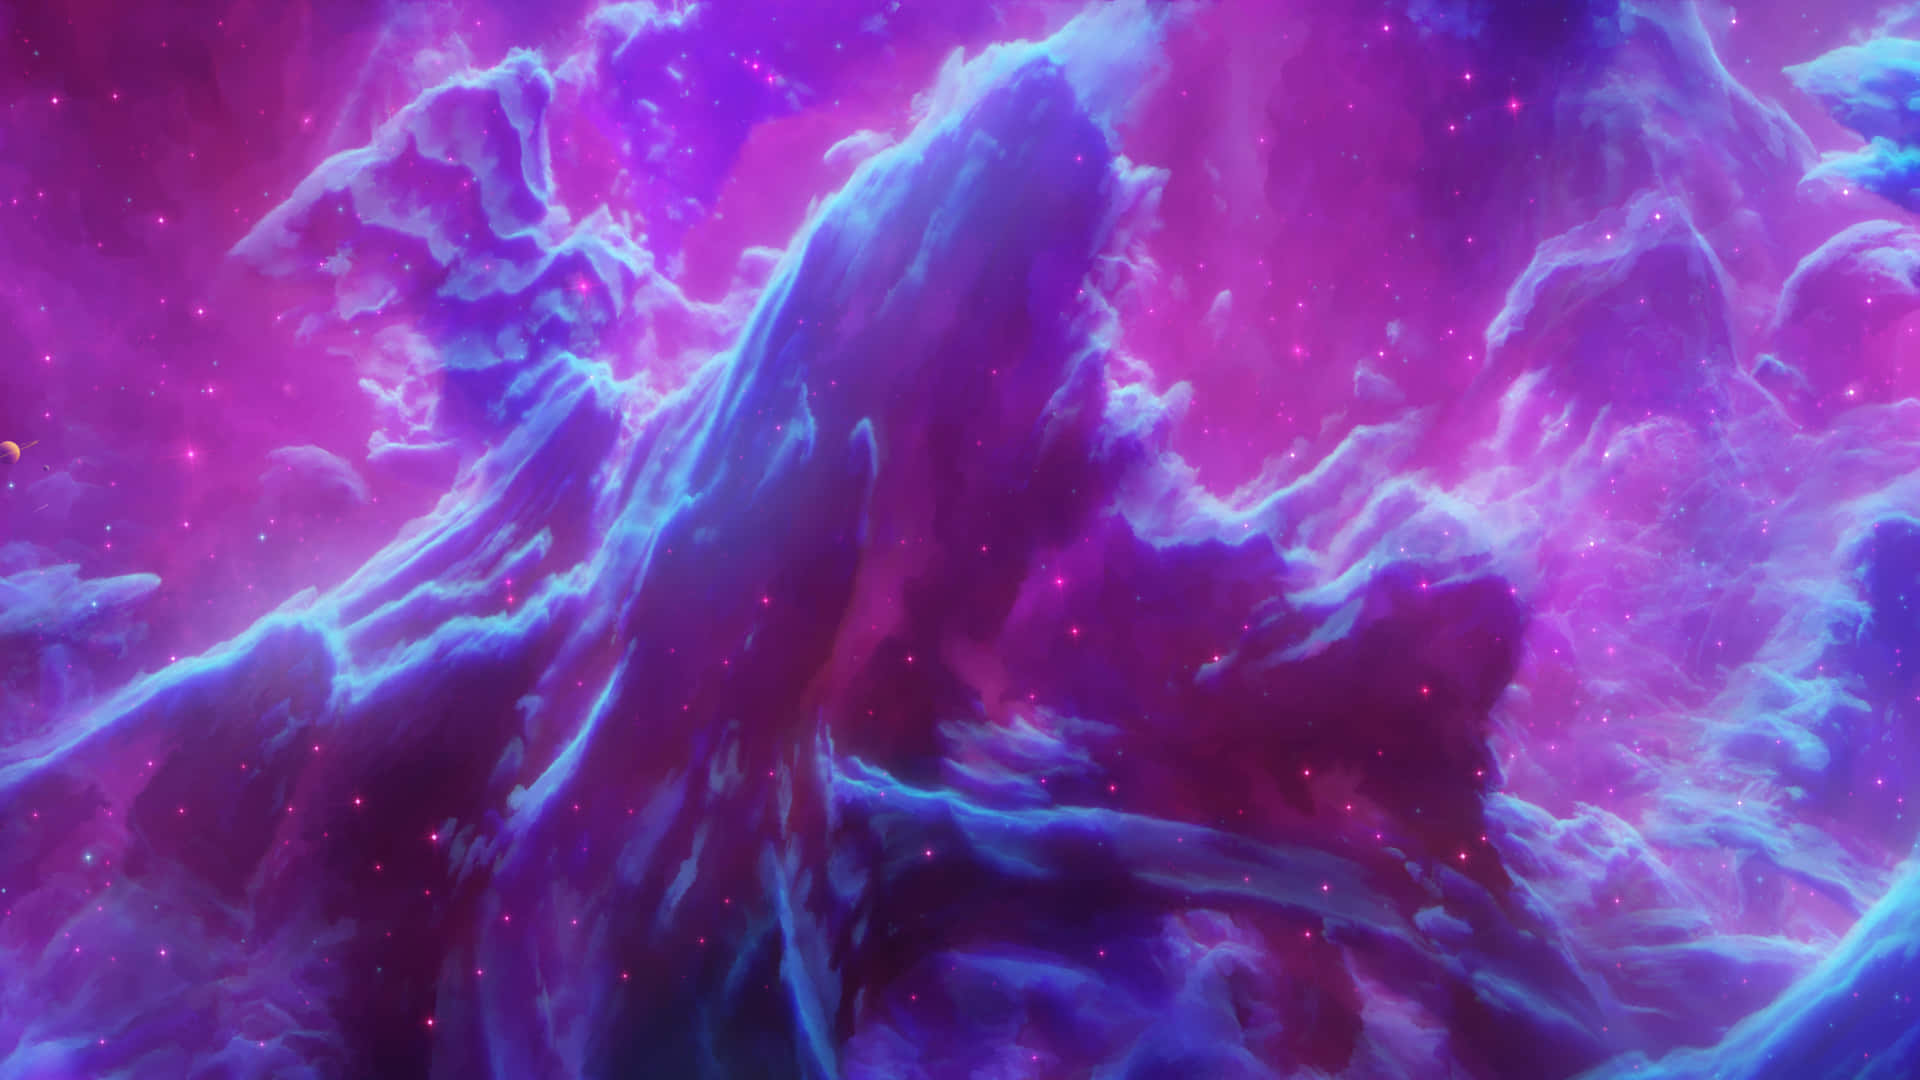 Explore the Galaxy and Beyond in 8K Wallpaper